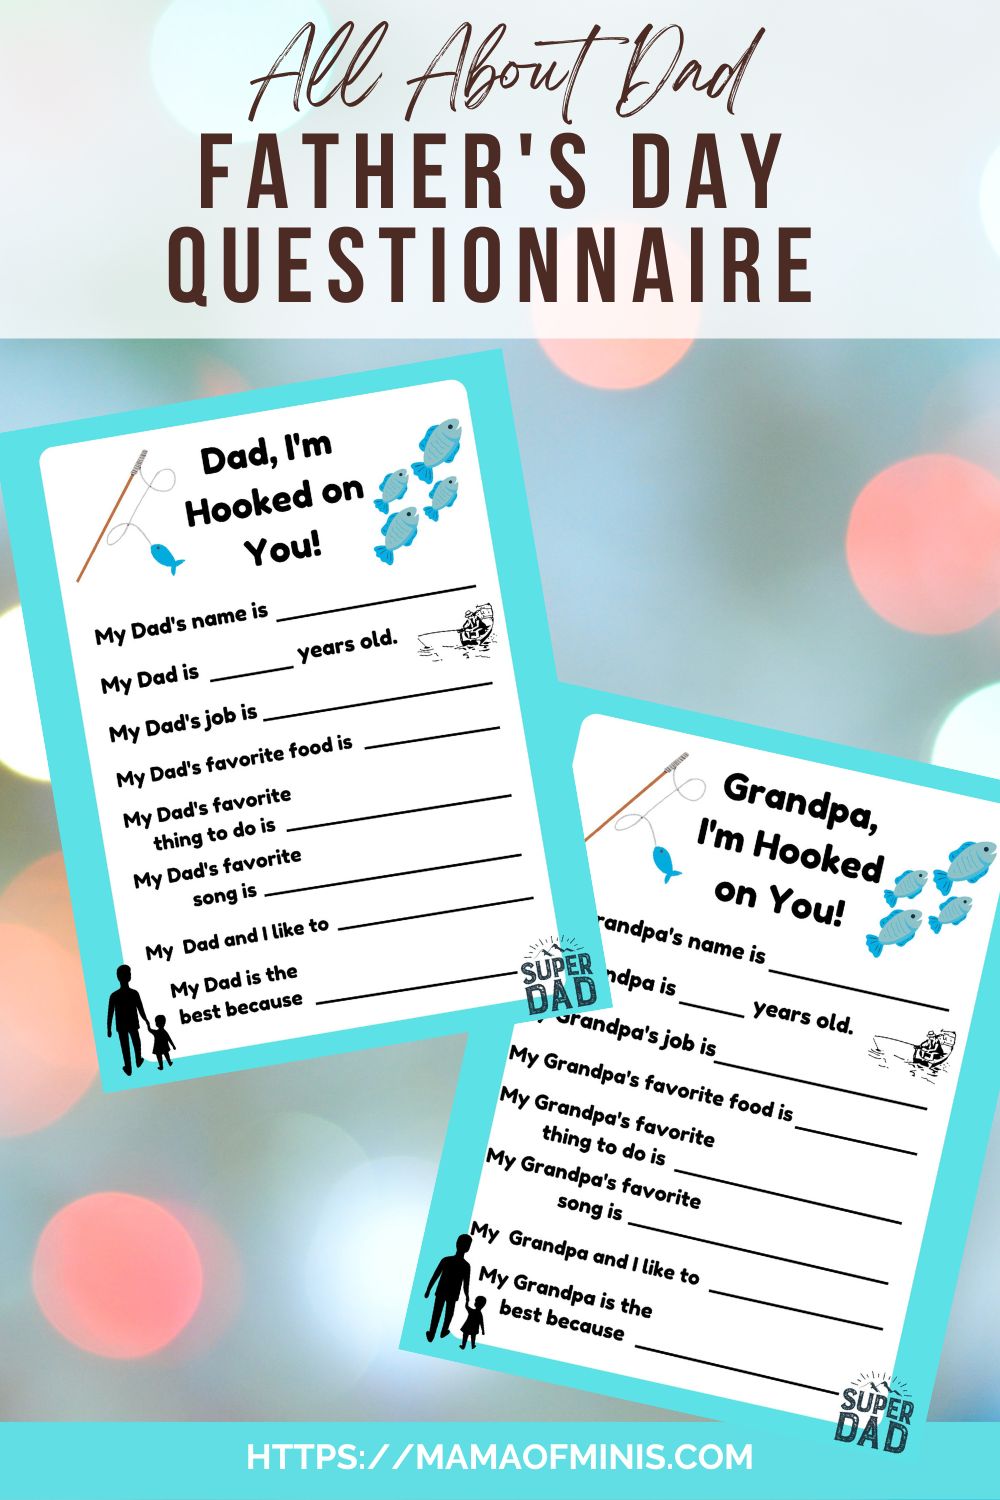 All About Dad Father's Day Questoinnaire PDF